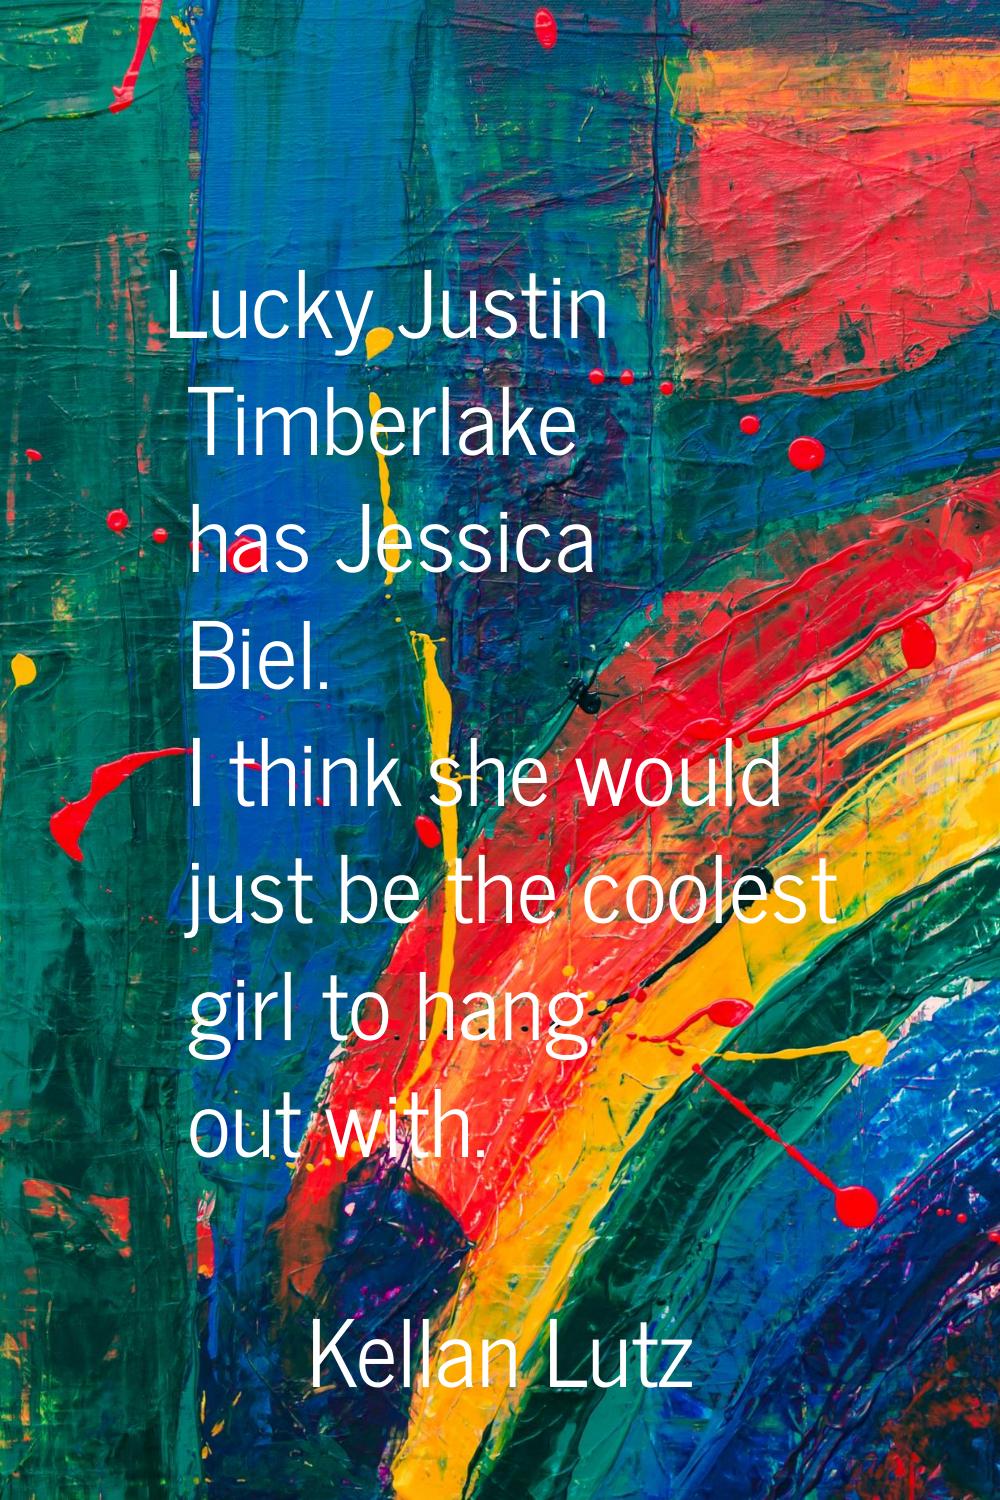 Lucky Justin Timberlake has Jessica Biel. I think she would just be the coolest girl to hang out wi